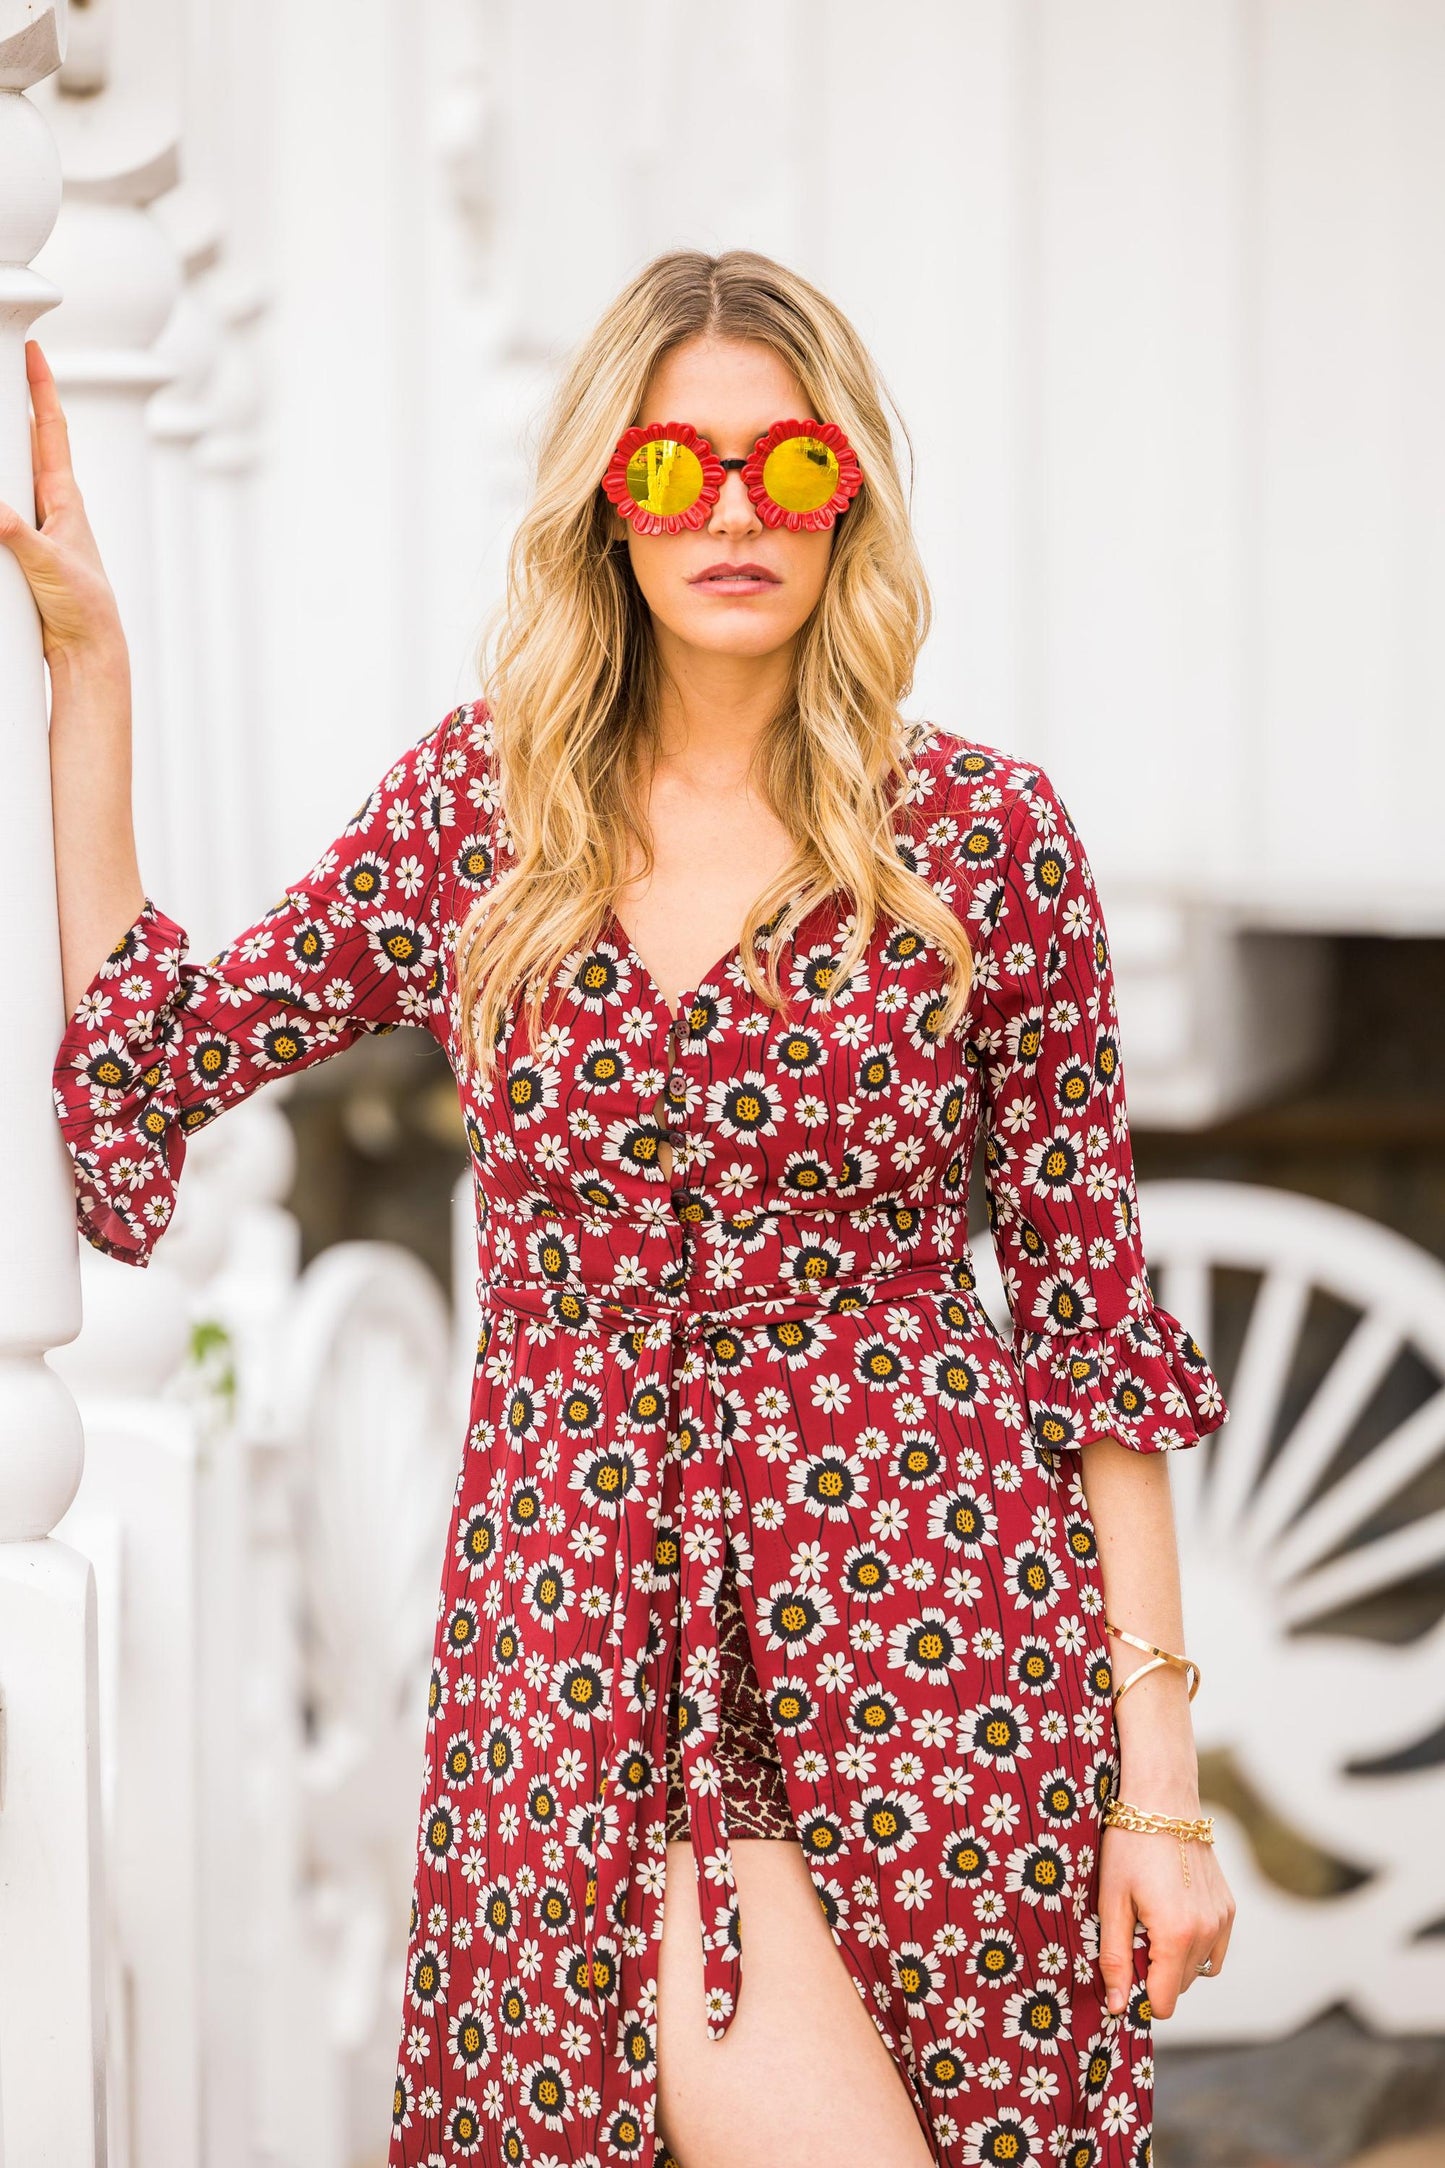 jennafer grace sunflower dressing gown coverup duster layering dress boho bohemian hippie romantic whimsical cottagecore beach resort holiday daisy floral rouge red blue ruffle sleeve handmade